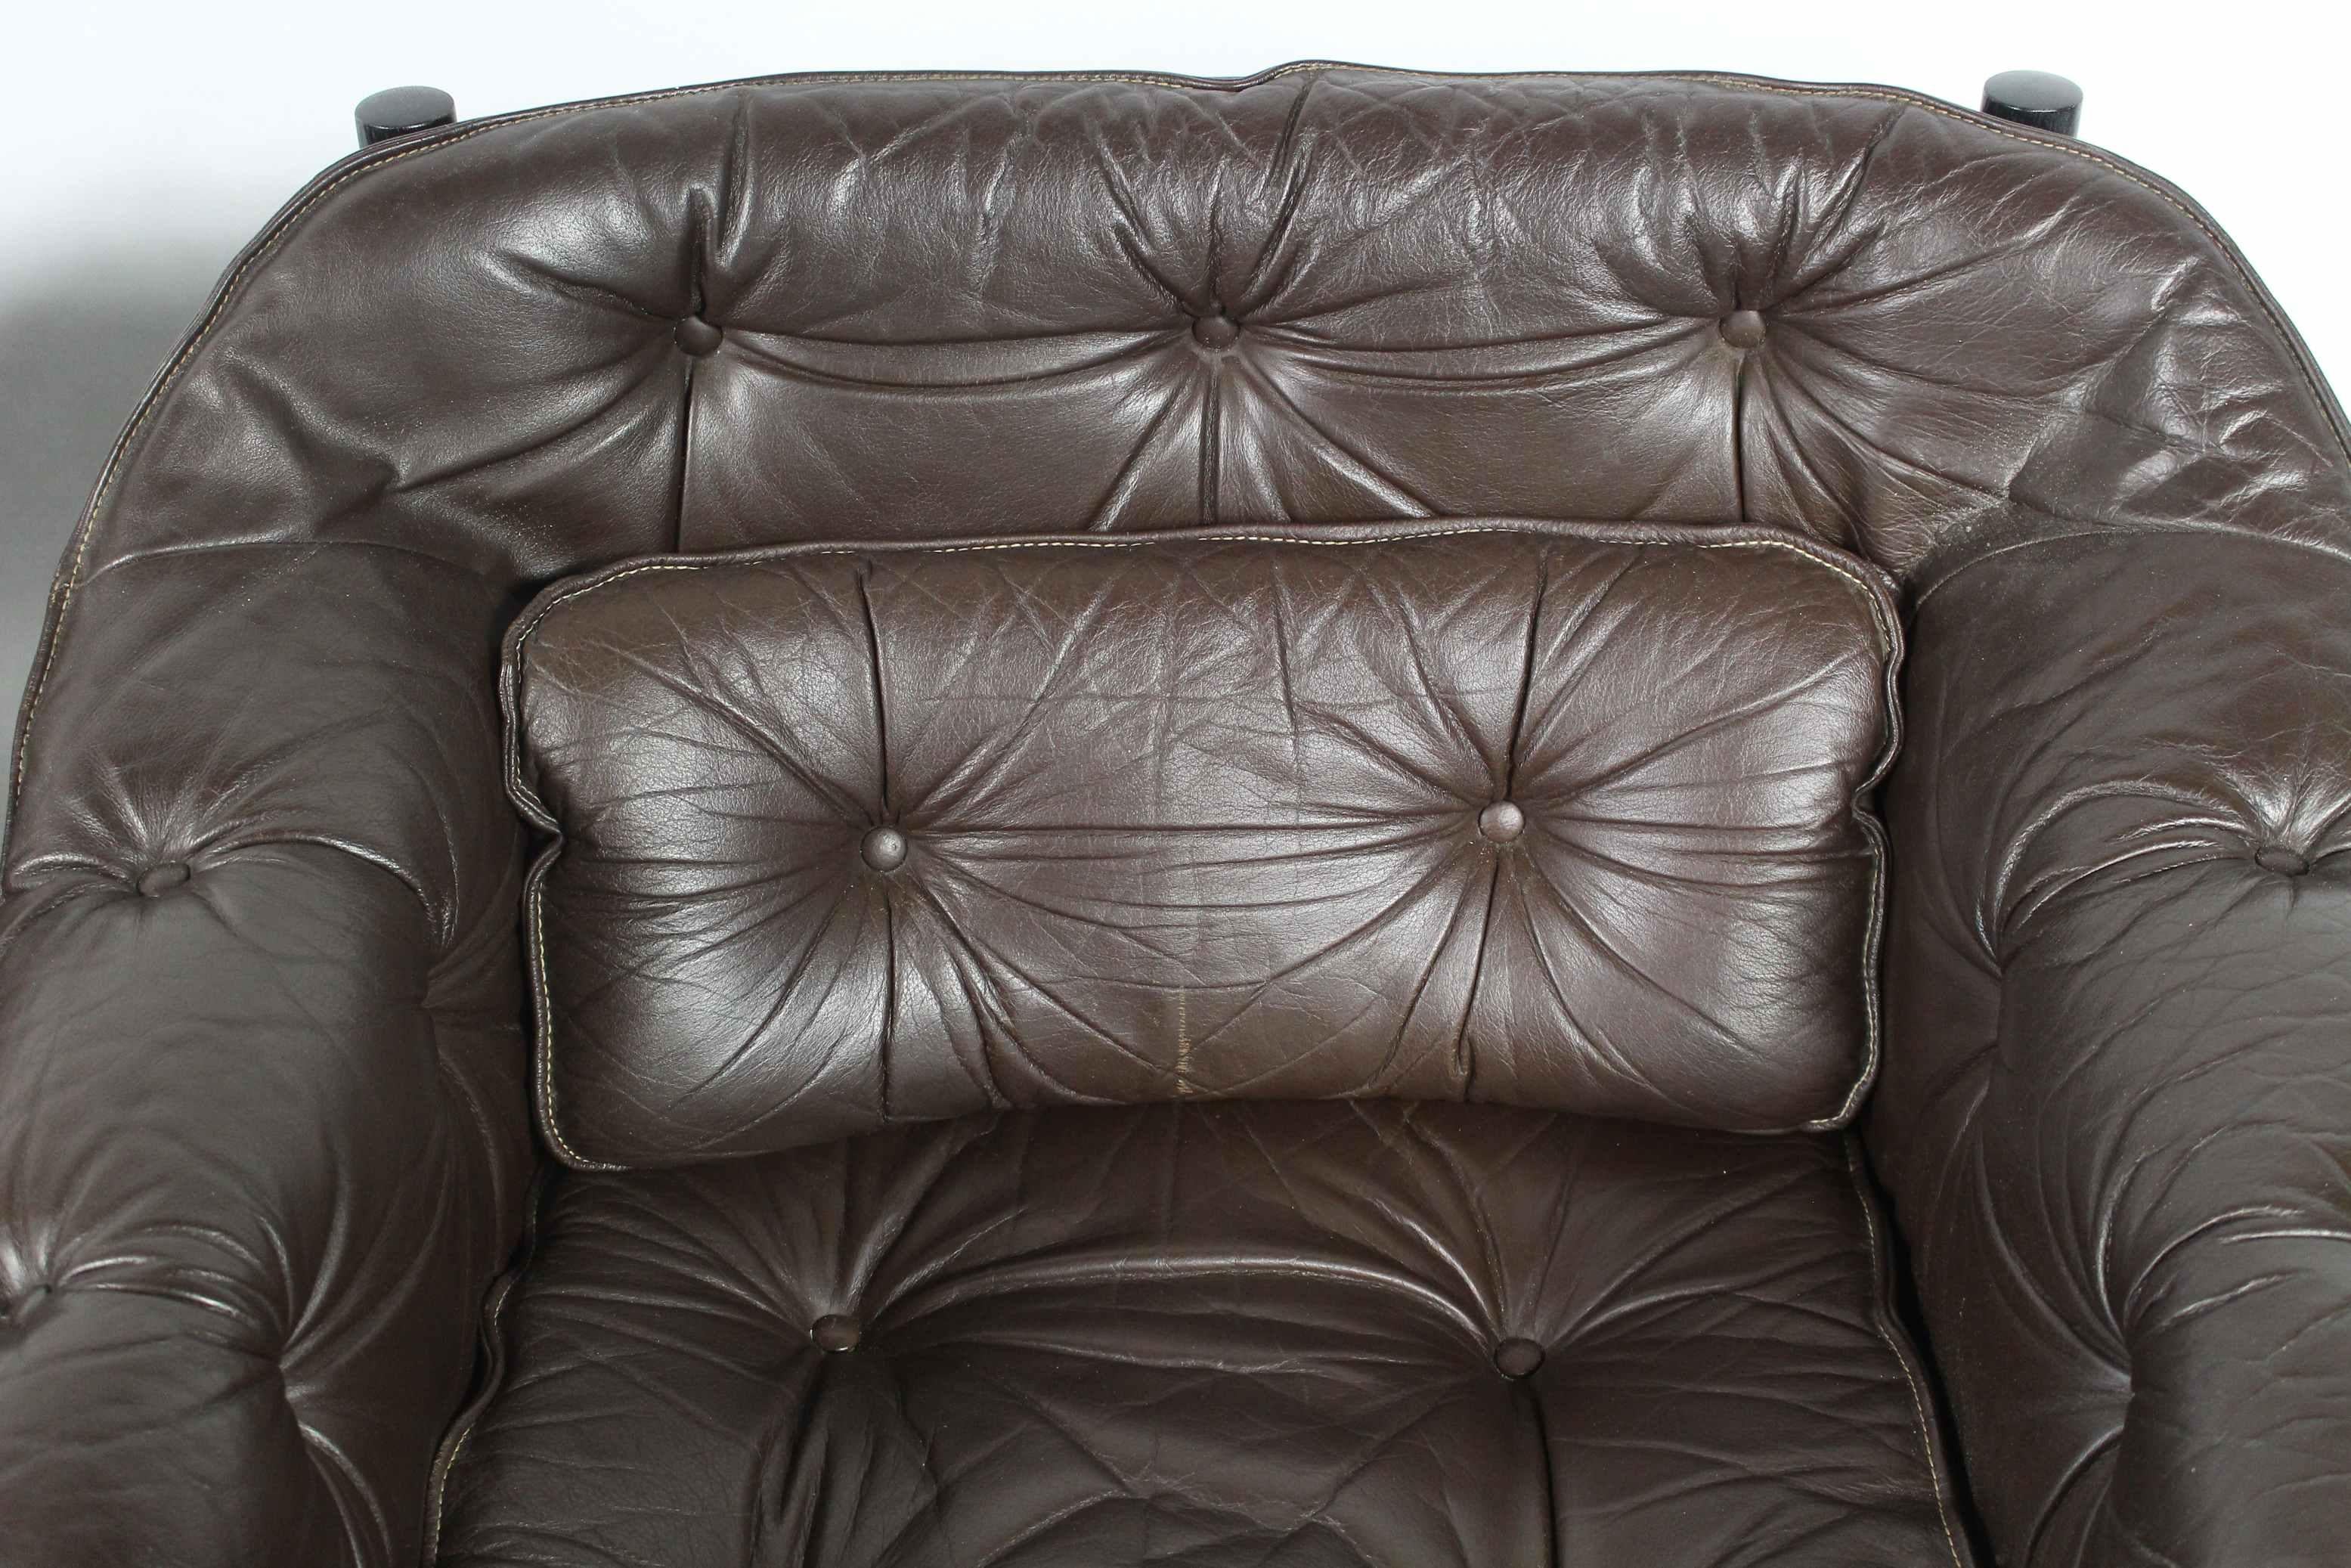 1960s Sven Ellekaer Brown Leather Chairs For Coja  For Sale 2